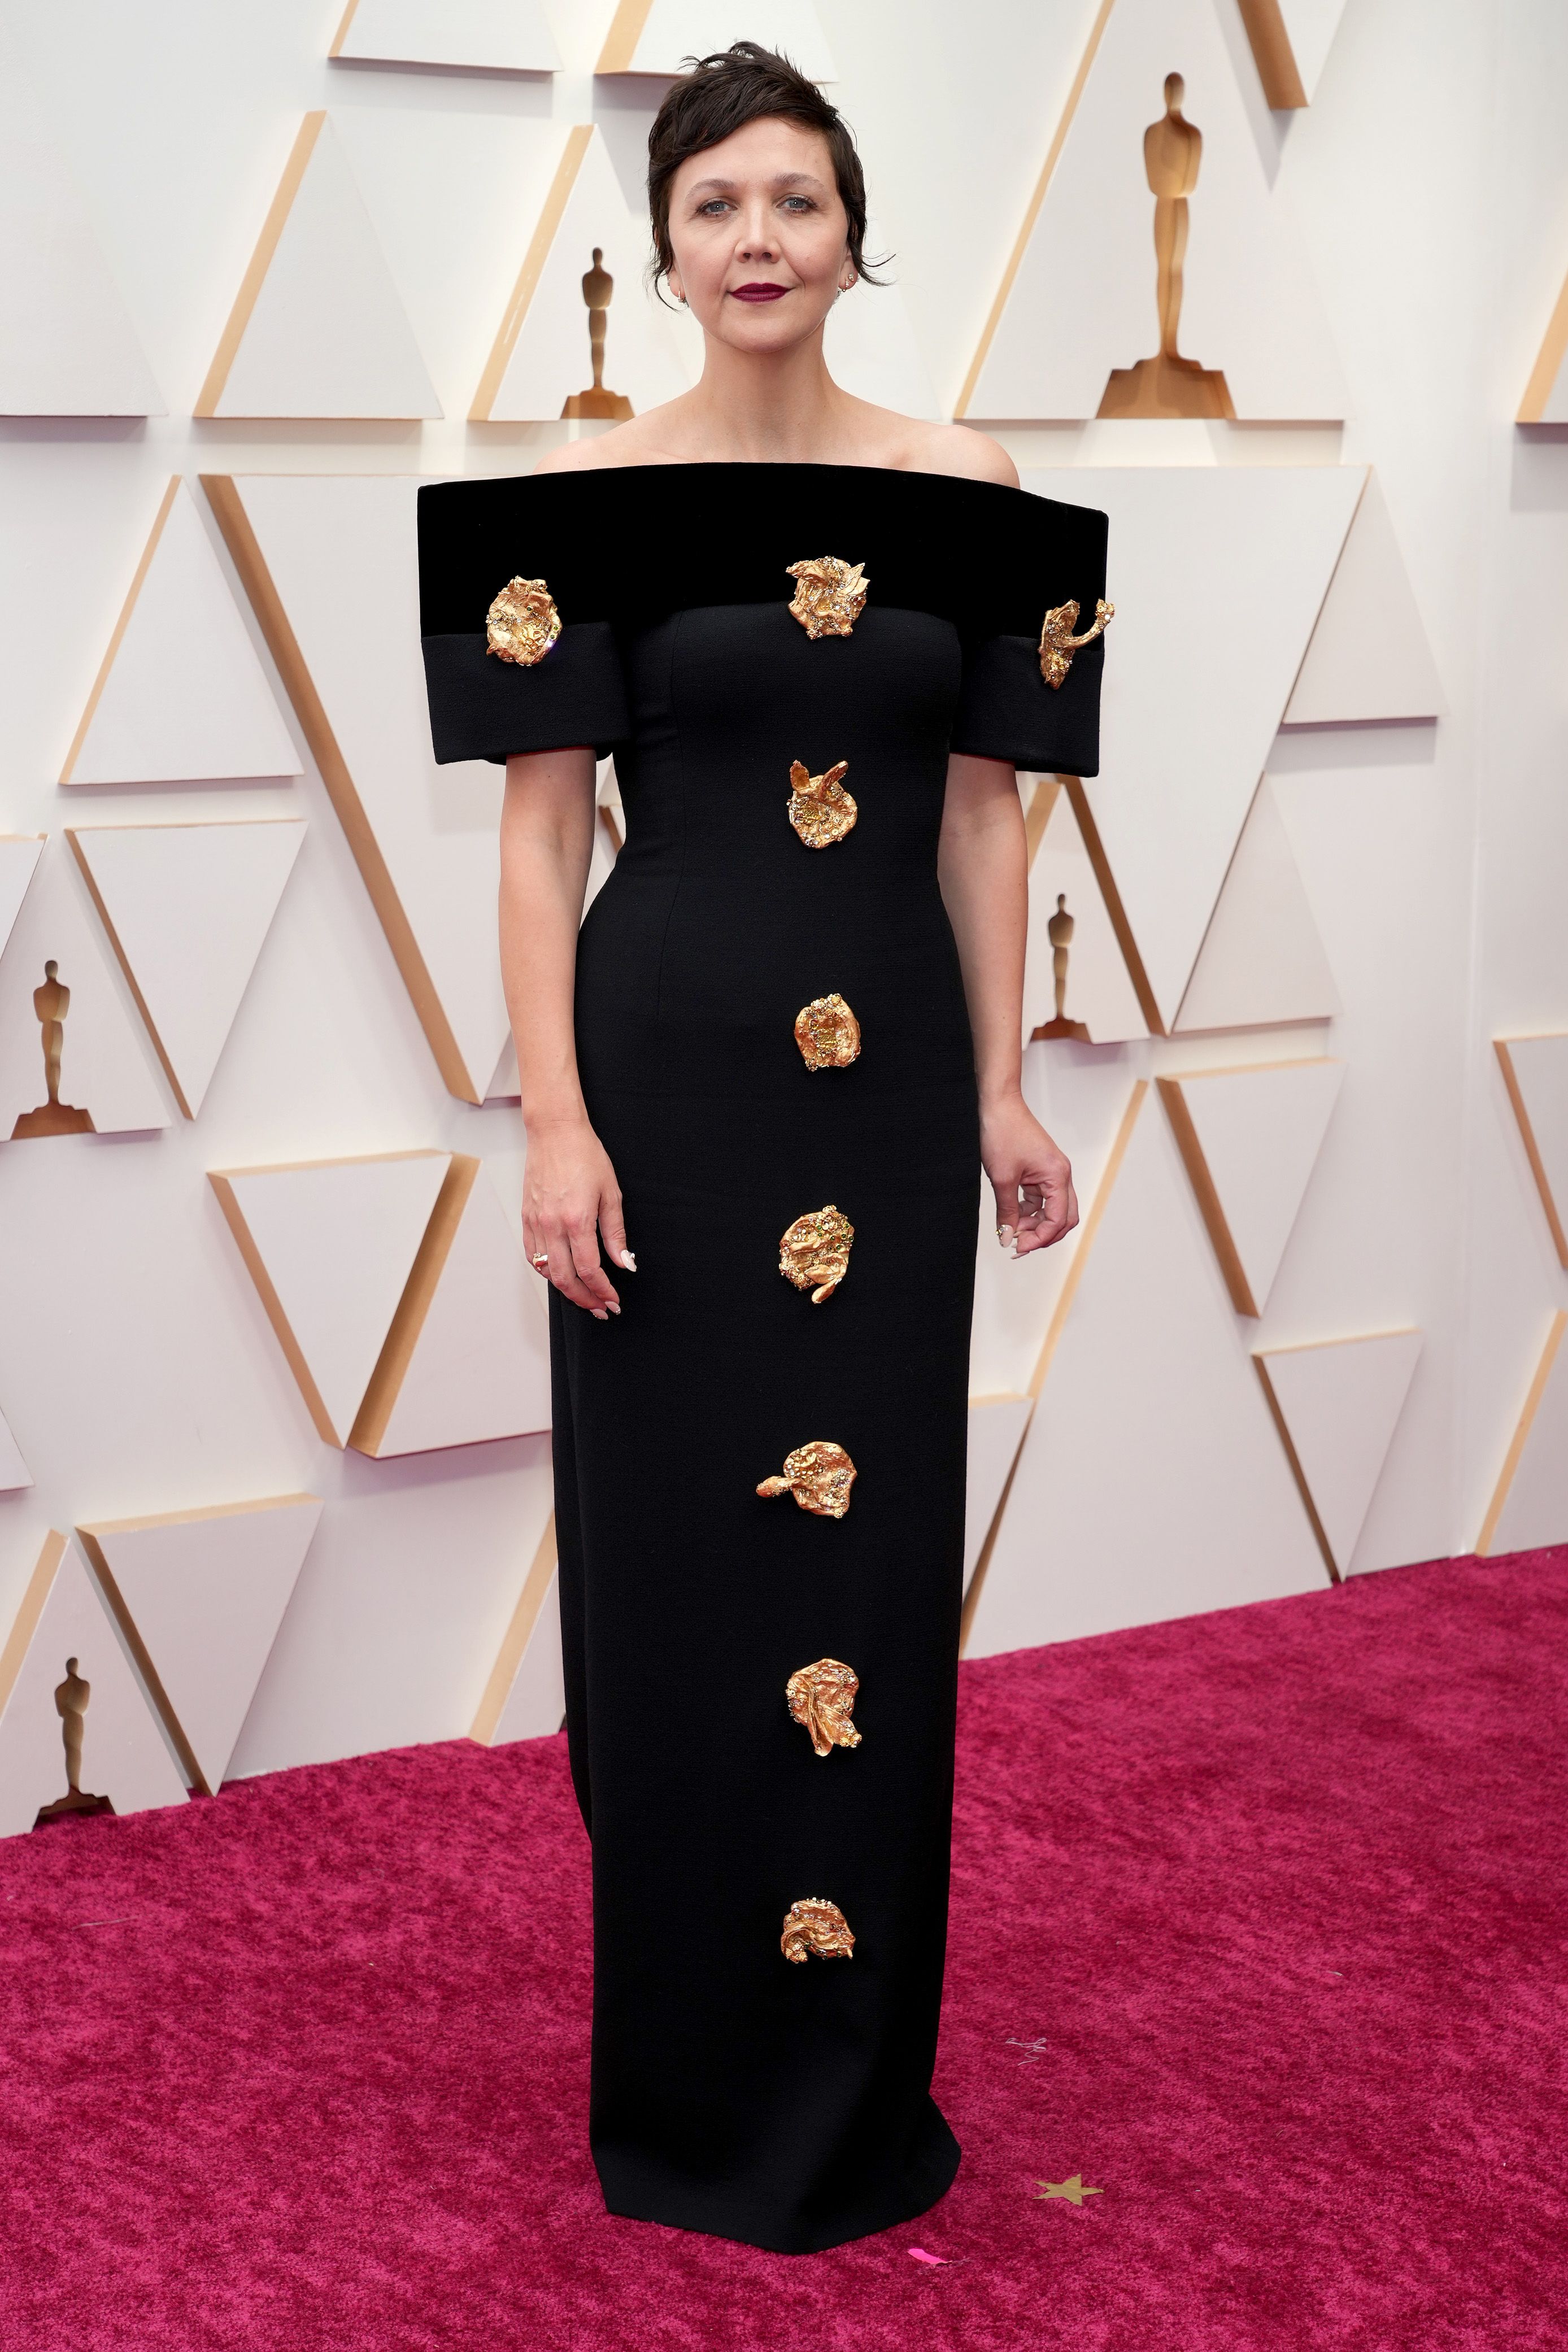 Oscars Red Carpet 2022: See All the Fashion Dresses From The Academy Awards